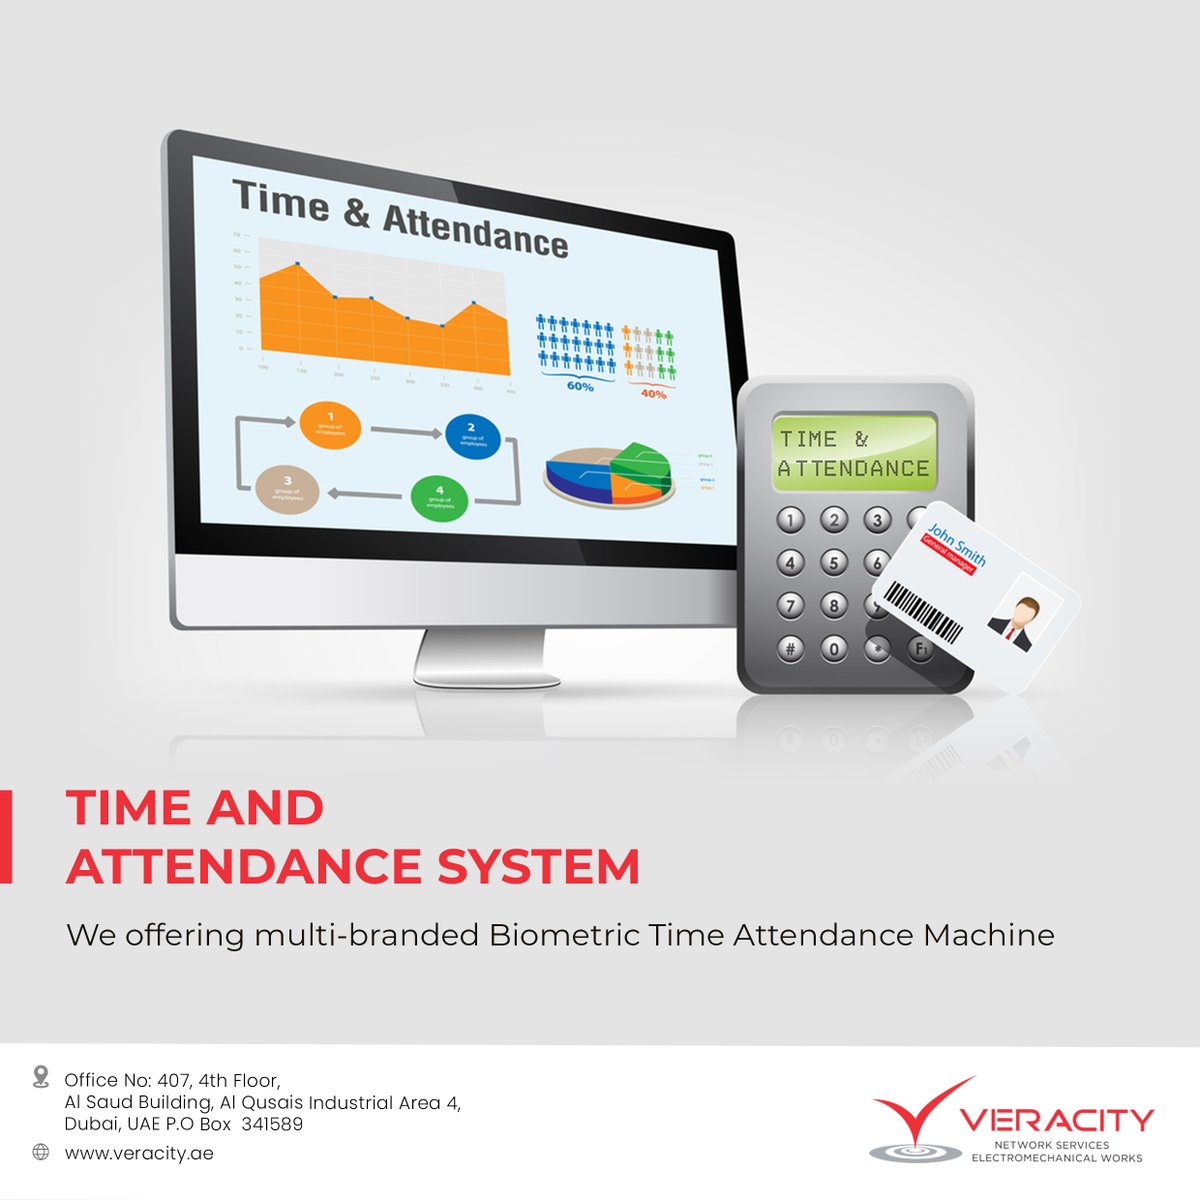 Time and attendance system 
we offering  multi-brand biometric time attendance machine 
#specialized #system #intergrators #ELV #contractor #construction #securitysystem #ICT #AVSystem #electromechanical #engineering #electrical #electronics #uae #design #power #robotics